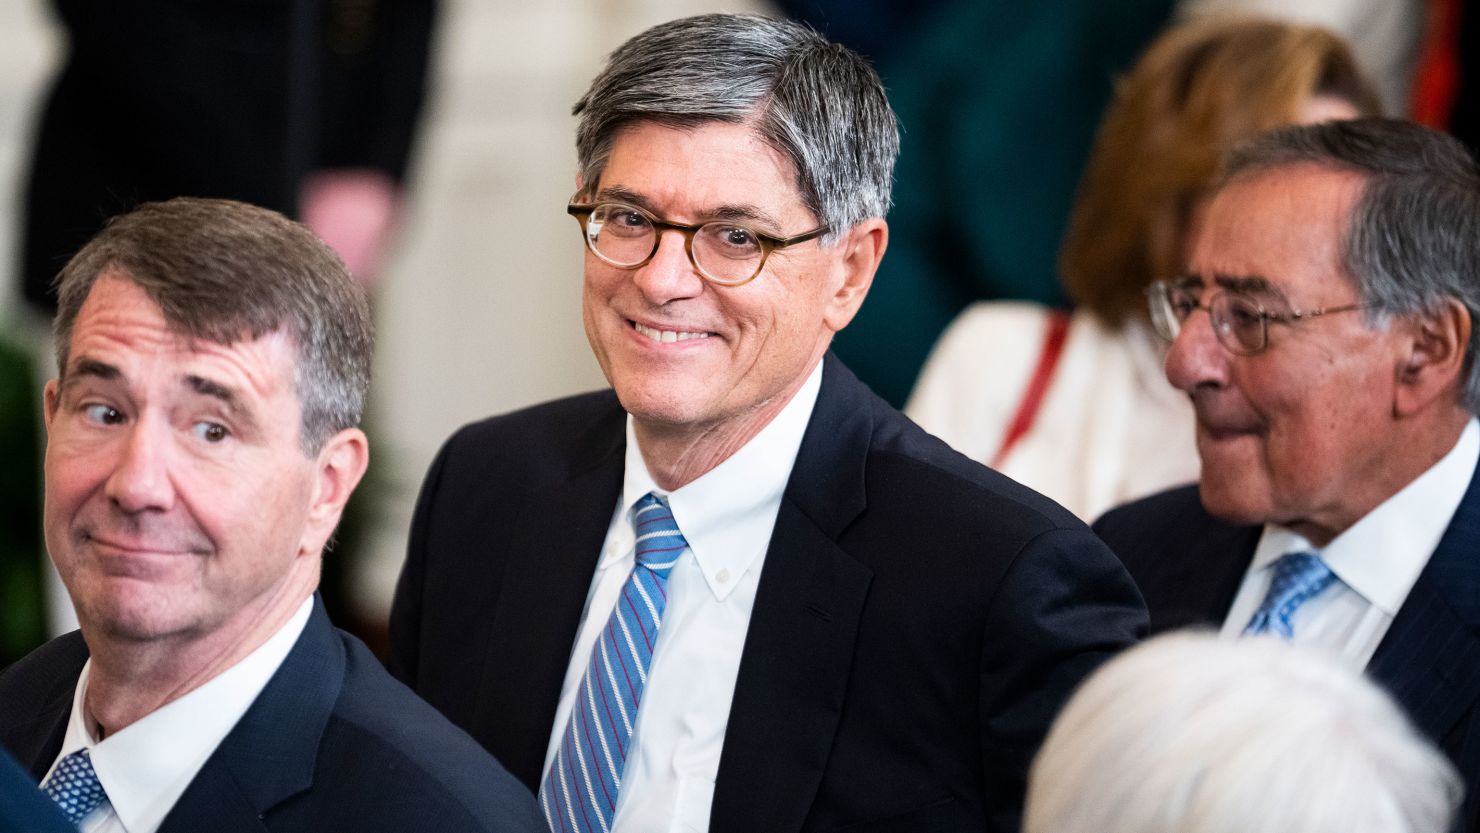 Former Treasury Secretary Jacob Lew attends the official White House portrait unveiling ceremony for President Barack Obama and former first lady Michelle Obama in the East Room of the White House on Wednesday, September 7, 2022.